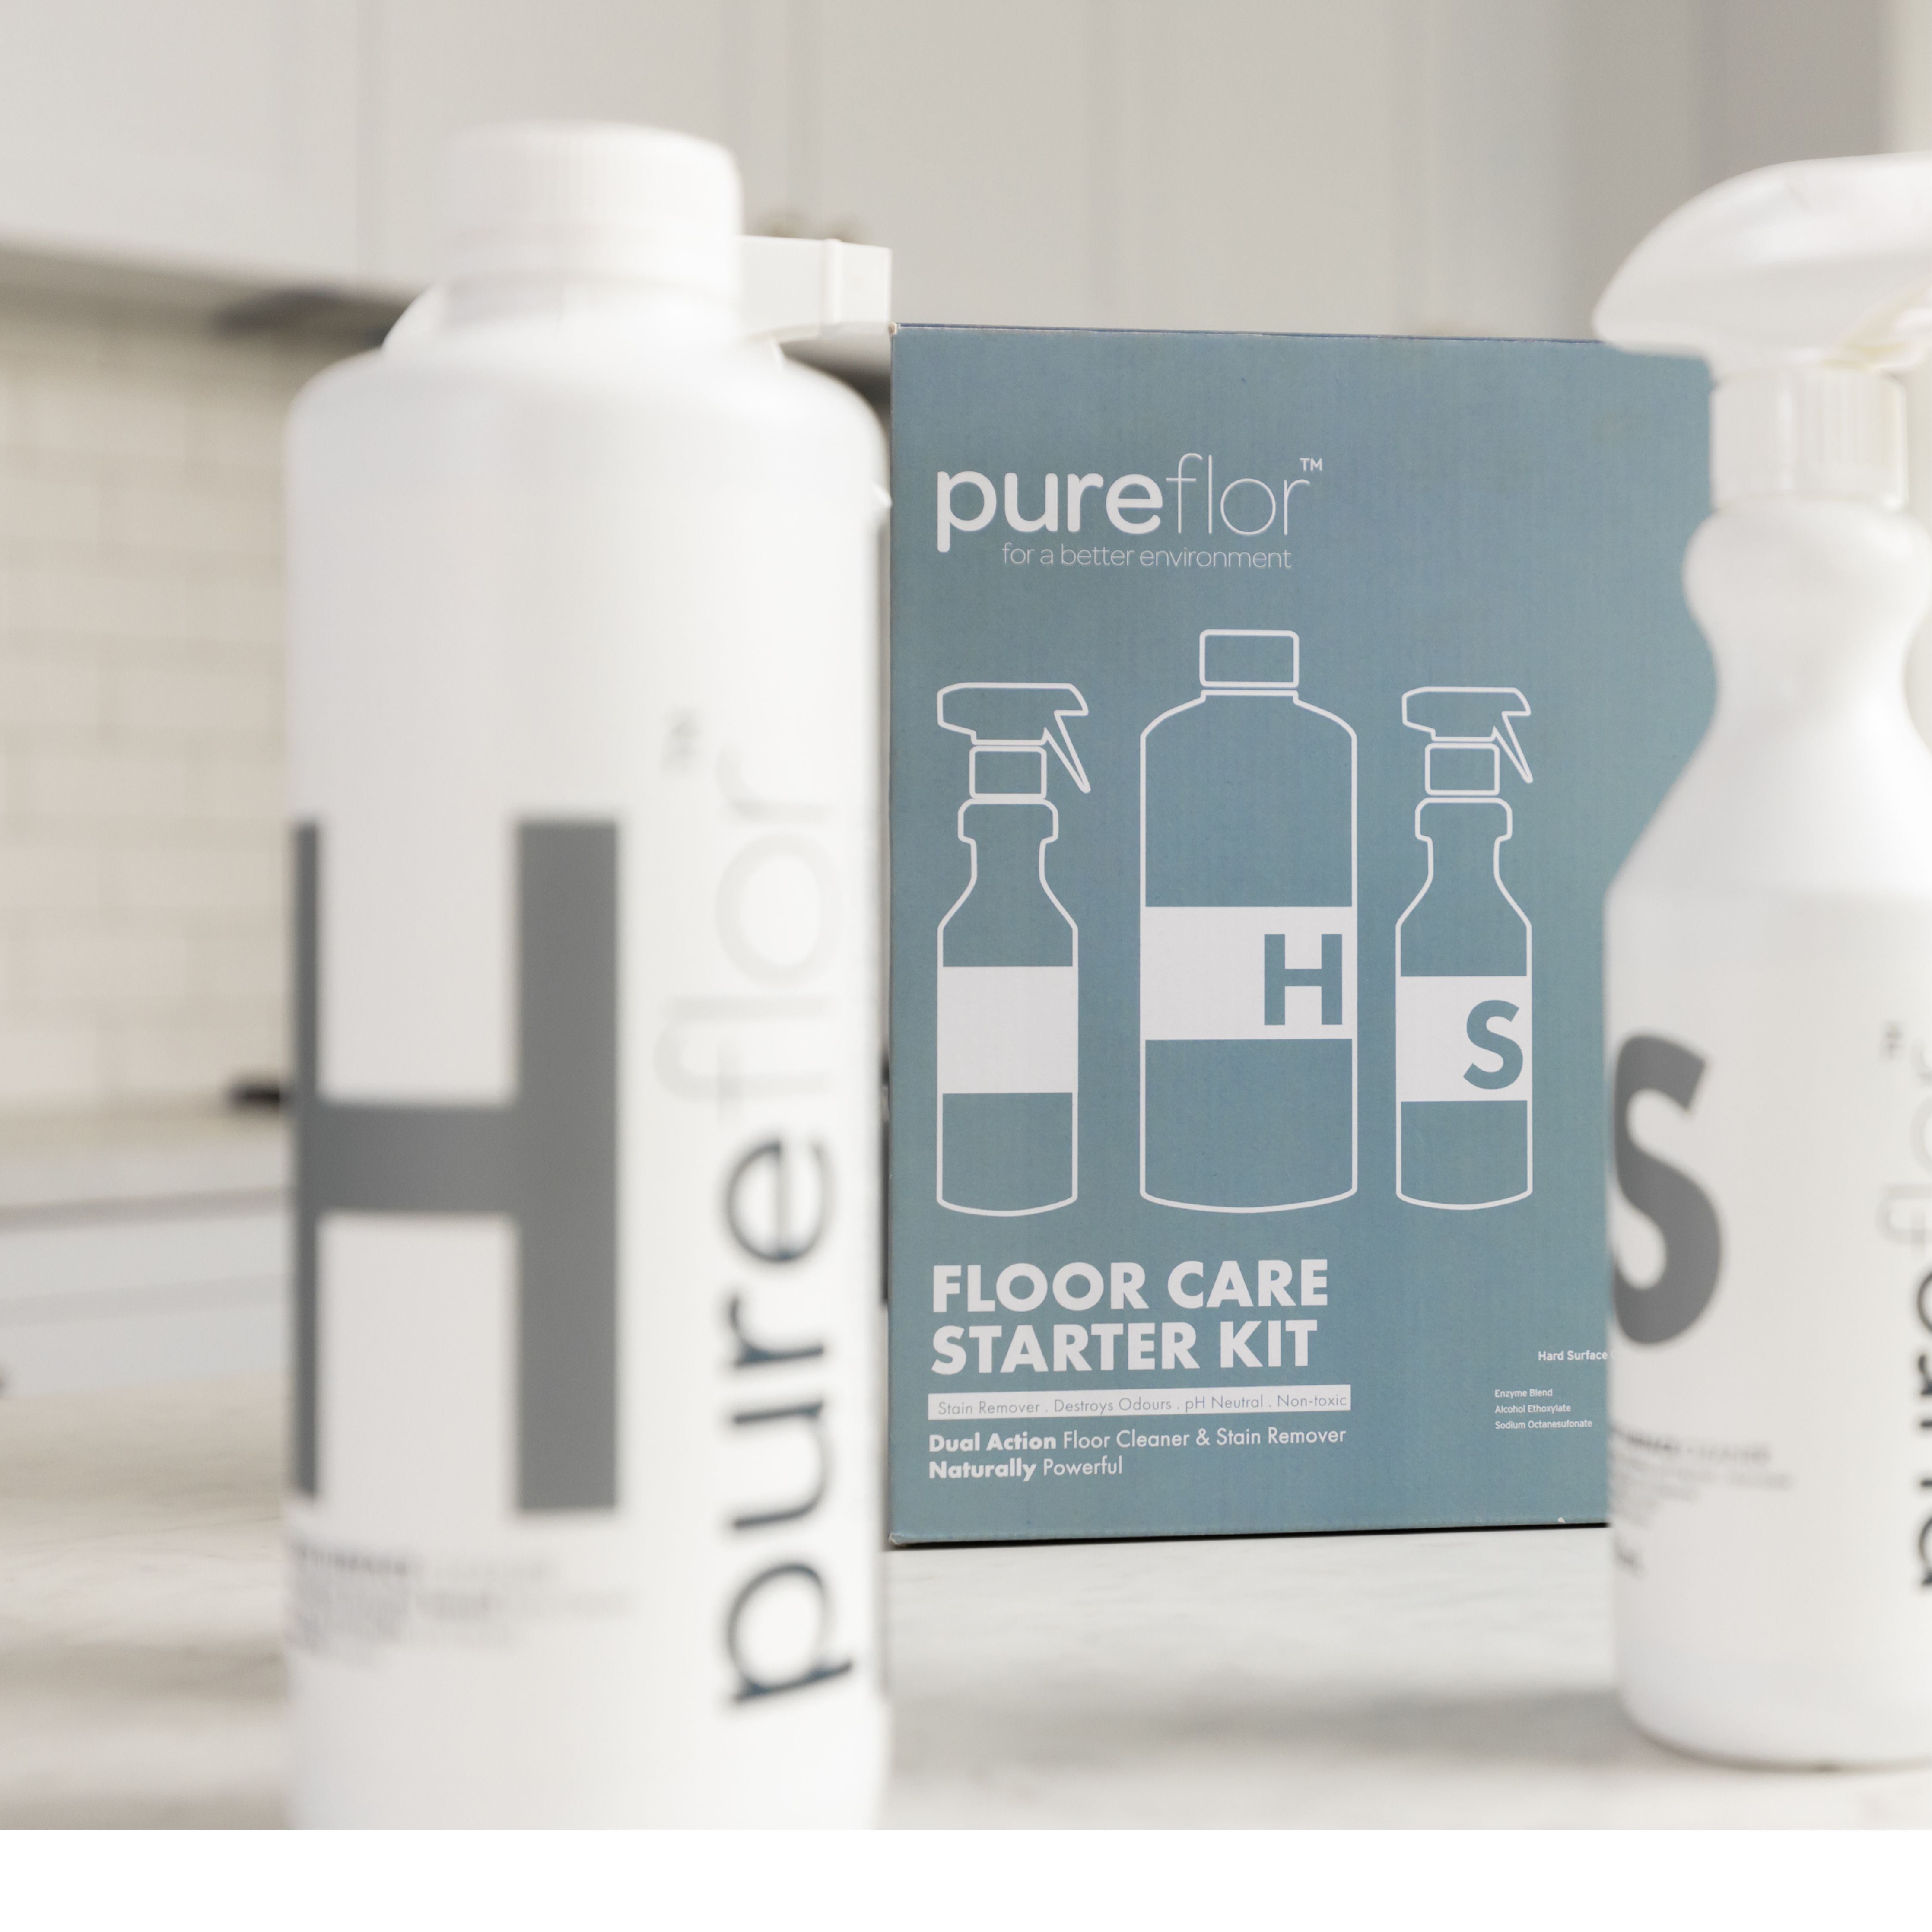 Keeping your pets safe with Pureflor